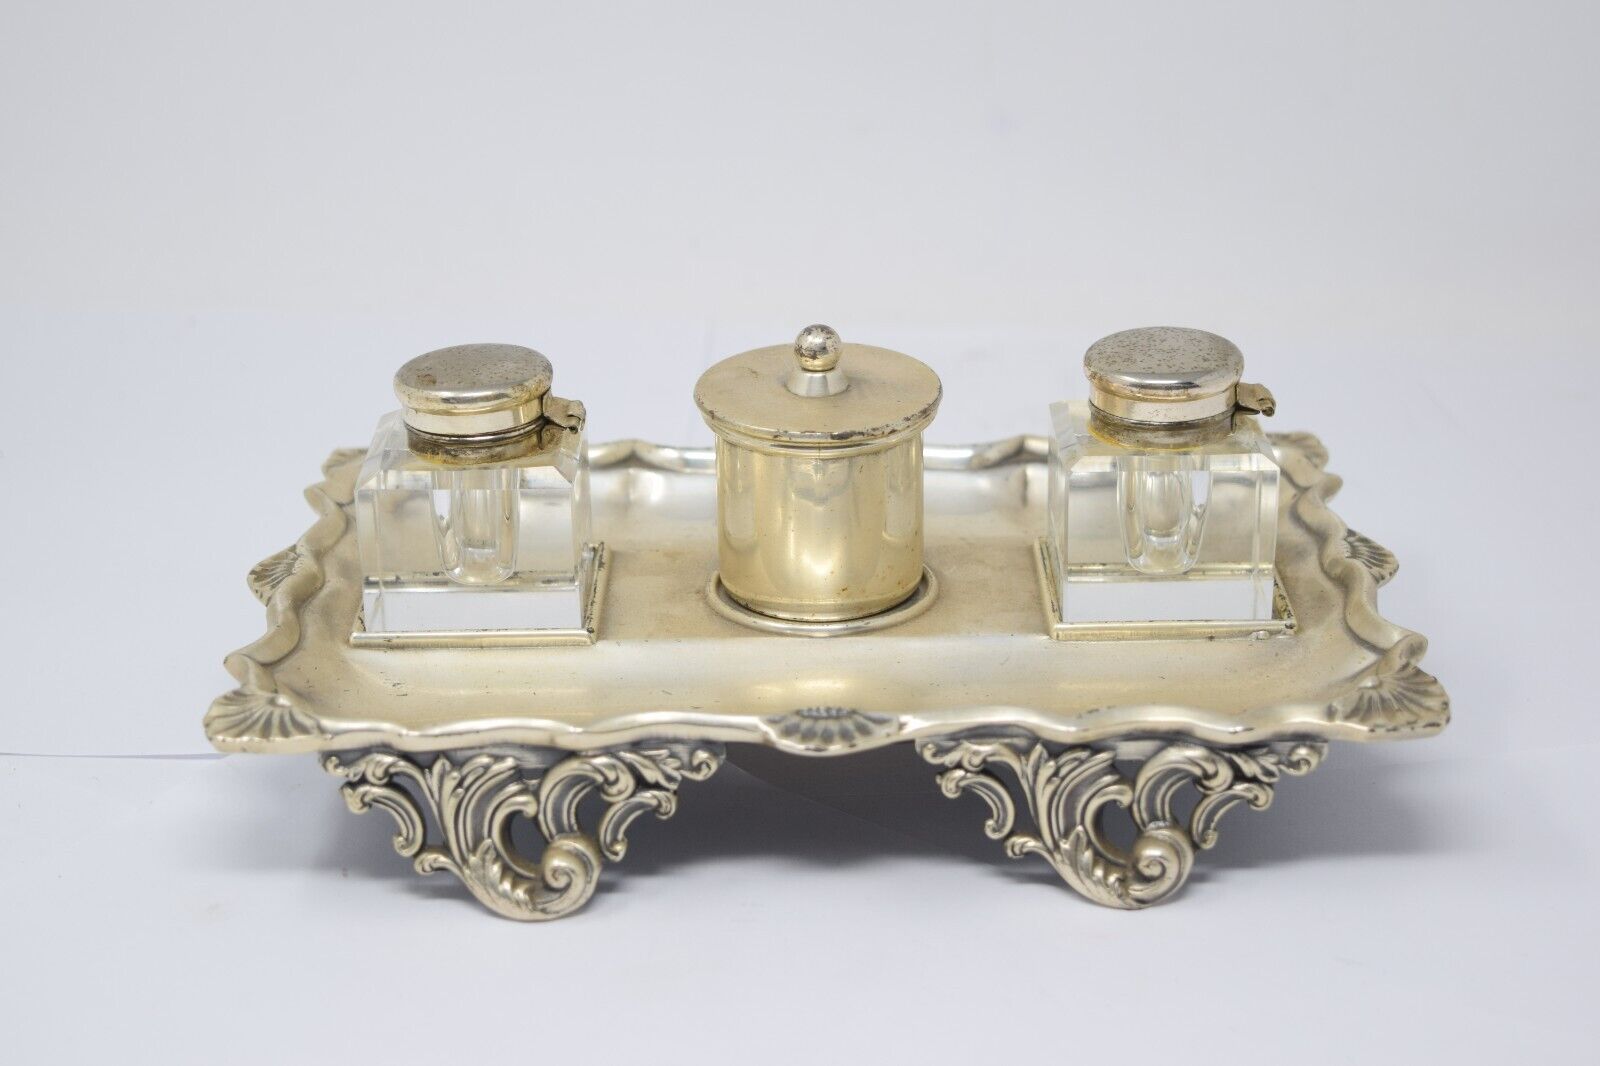 Vintage REPRODUCTION SHEFFIELD INKSTAND w CUT CUBE GLASS / CRYSTAL INKWELLS